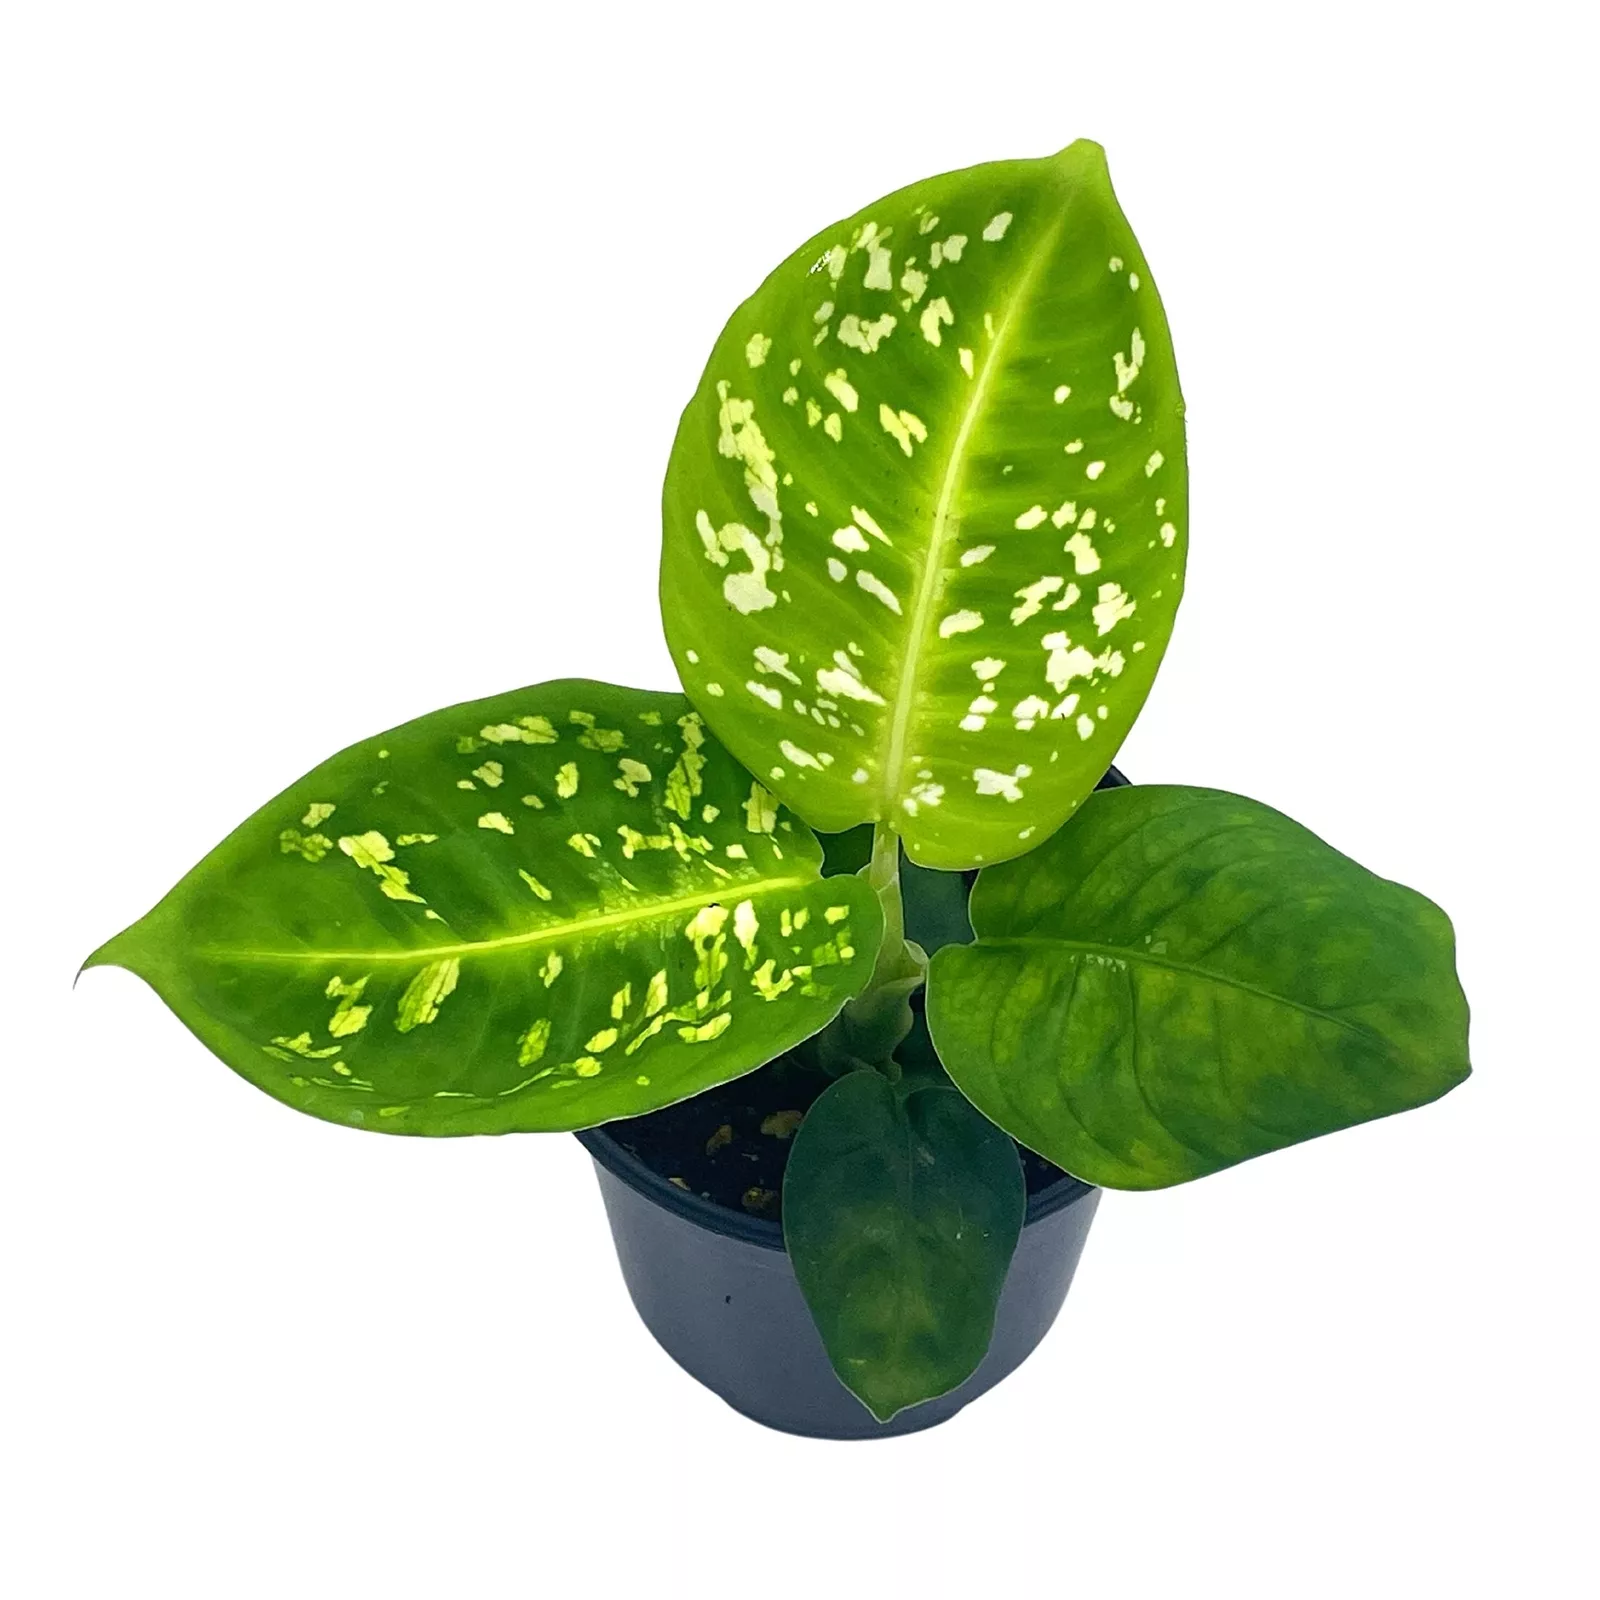 Dieffenba inia Reflector 4 in Dumb Cane House Plant Variegated - $39.62